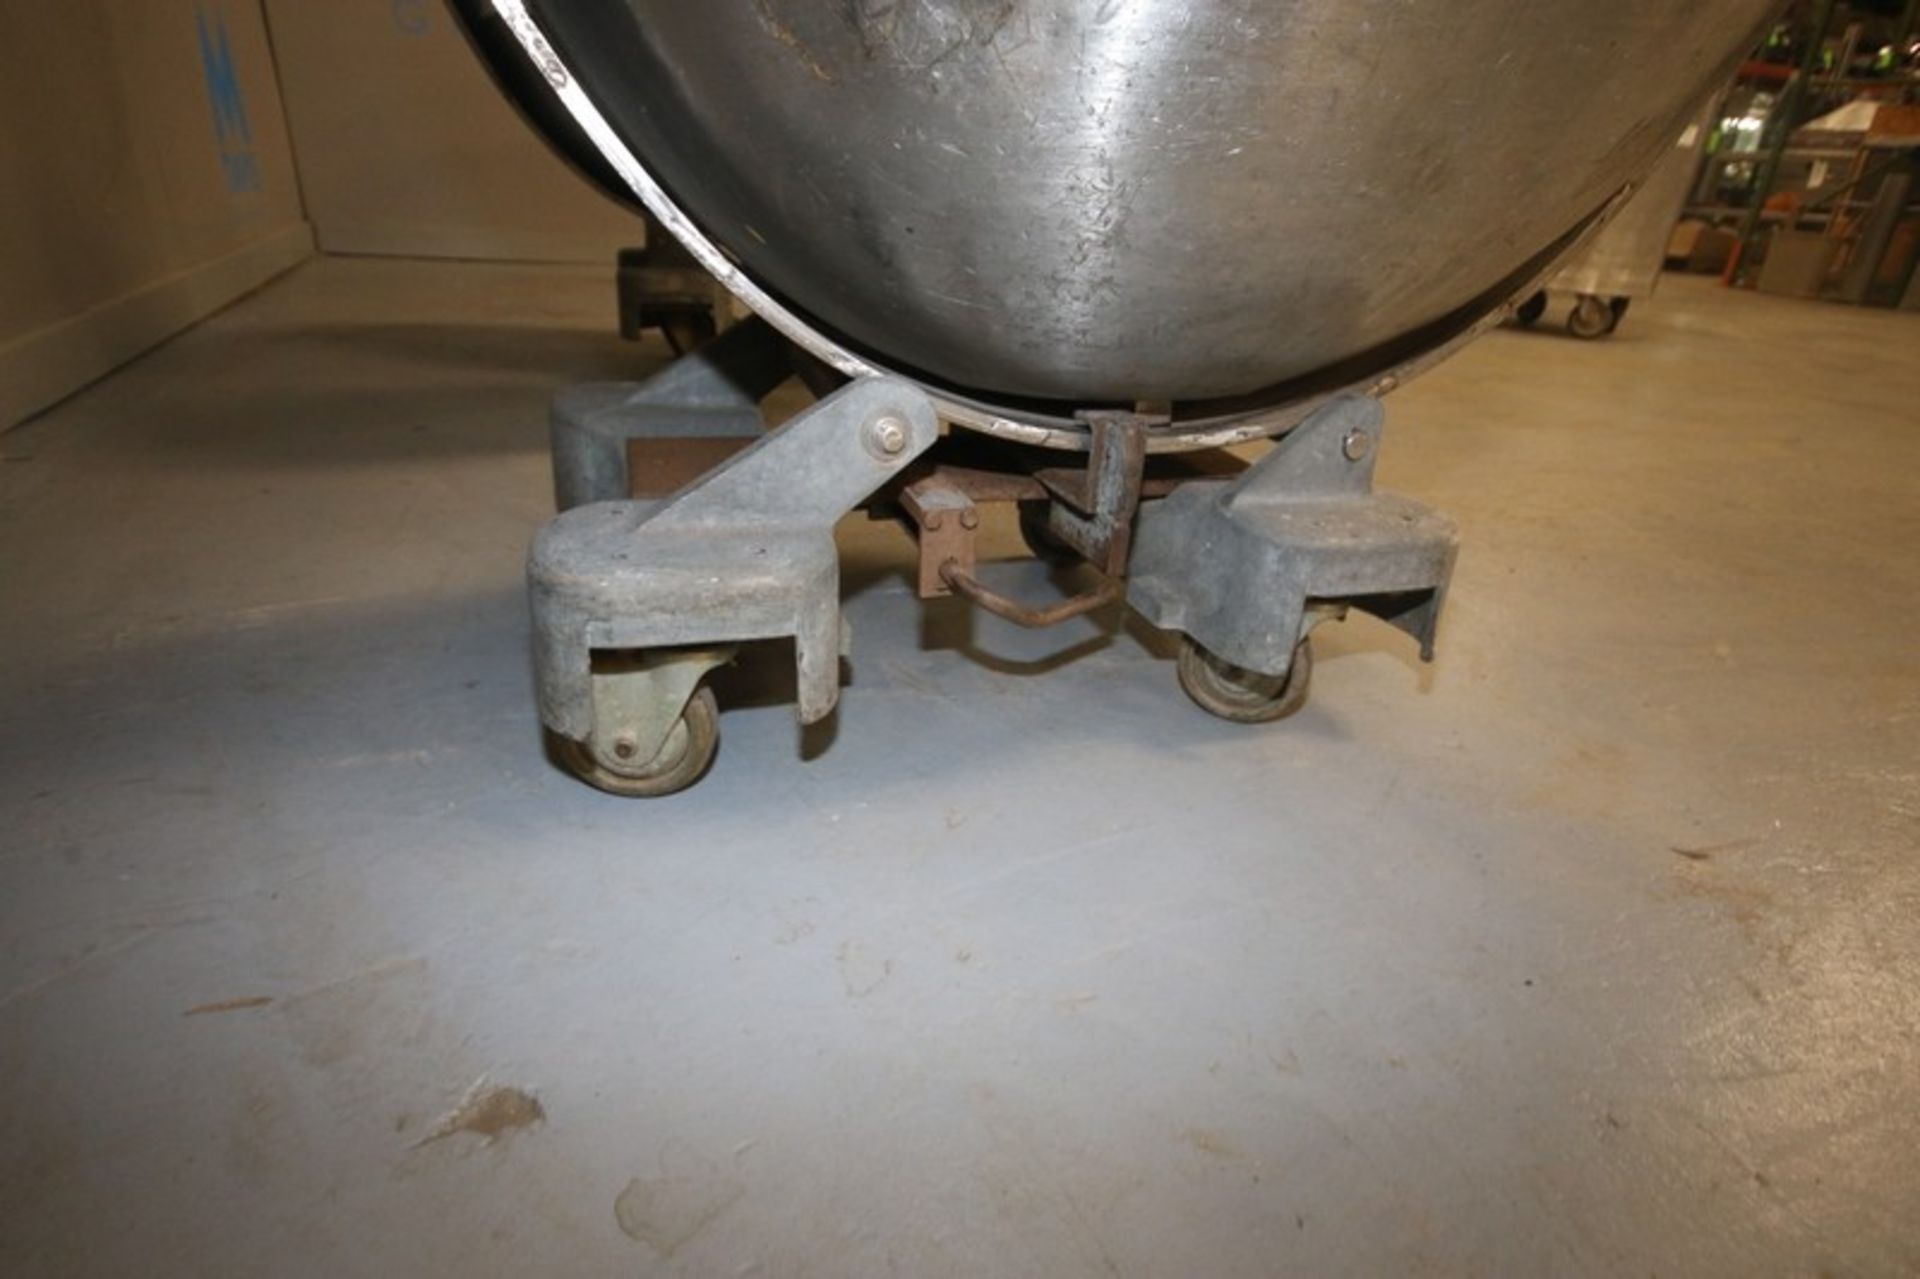 S/S Mixing Bowl, Internal Dims.:  Aprox. 32-1/2" Dia. x 26-1/2" Deep, Mounted on Portable Cart ( - Image 4 of 8